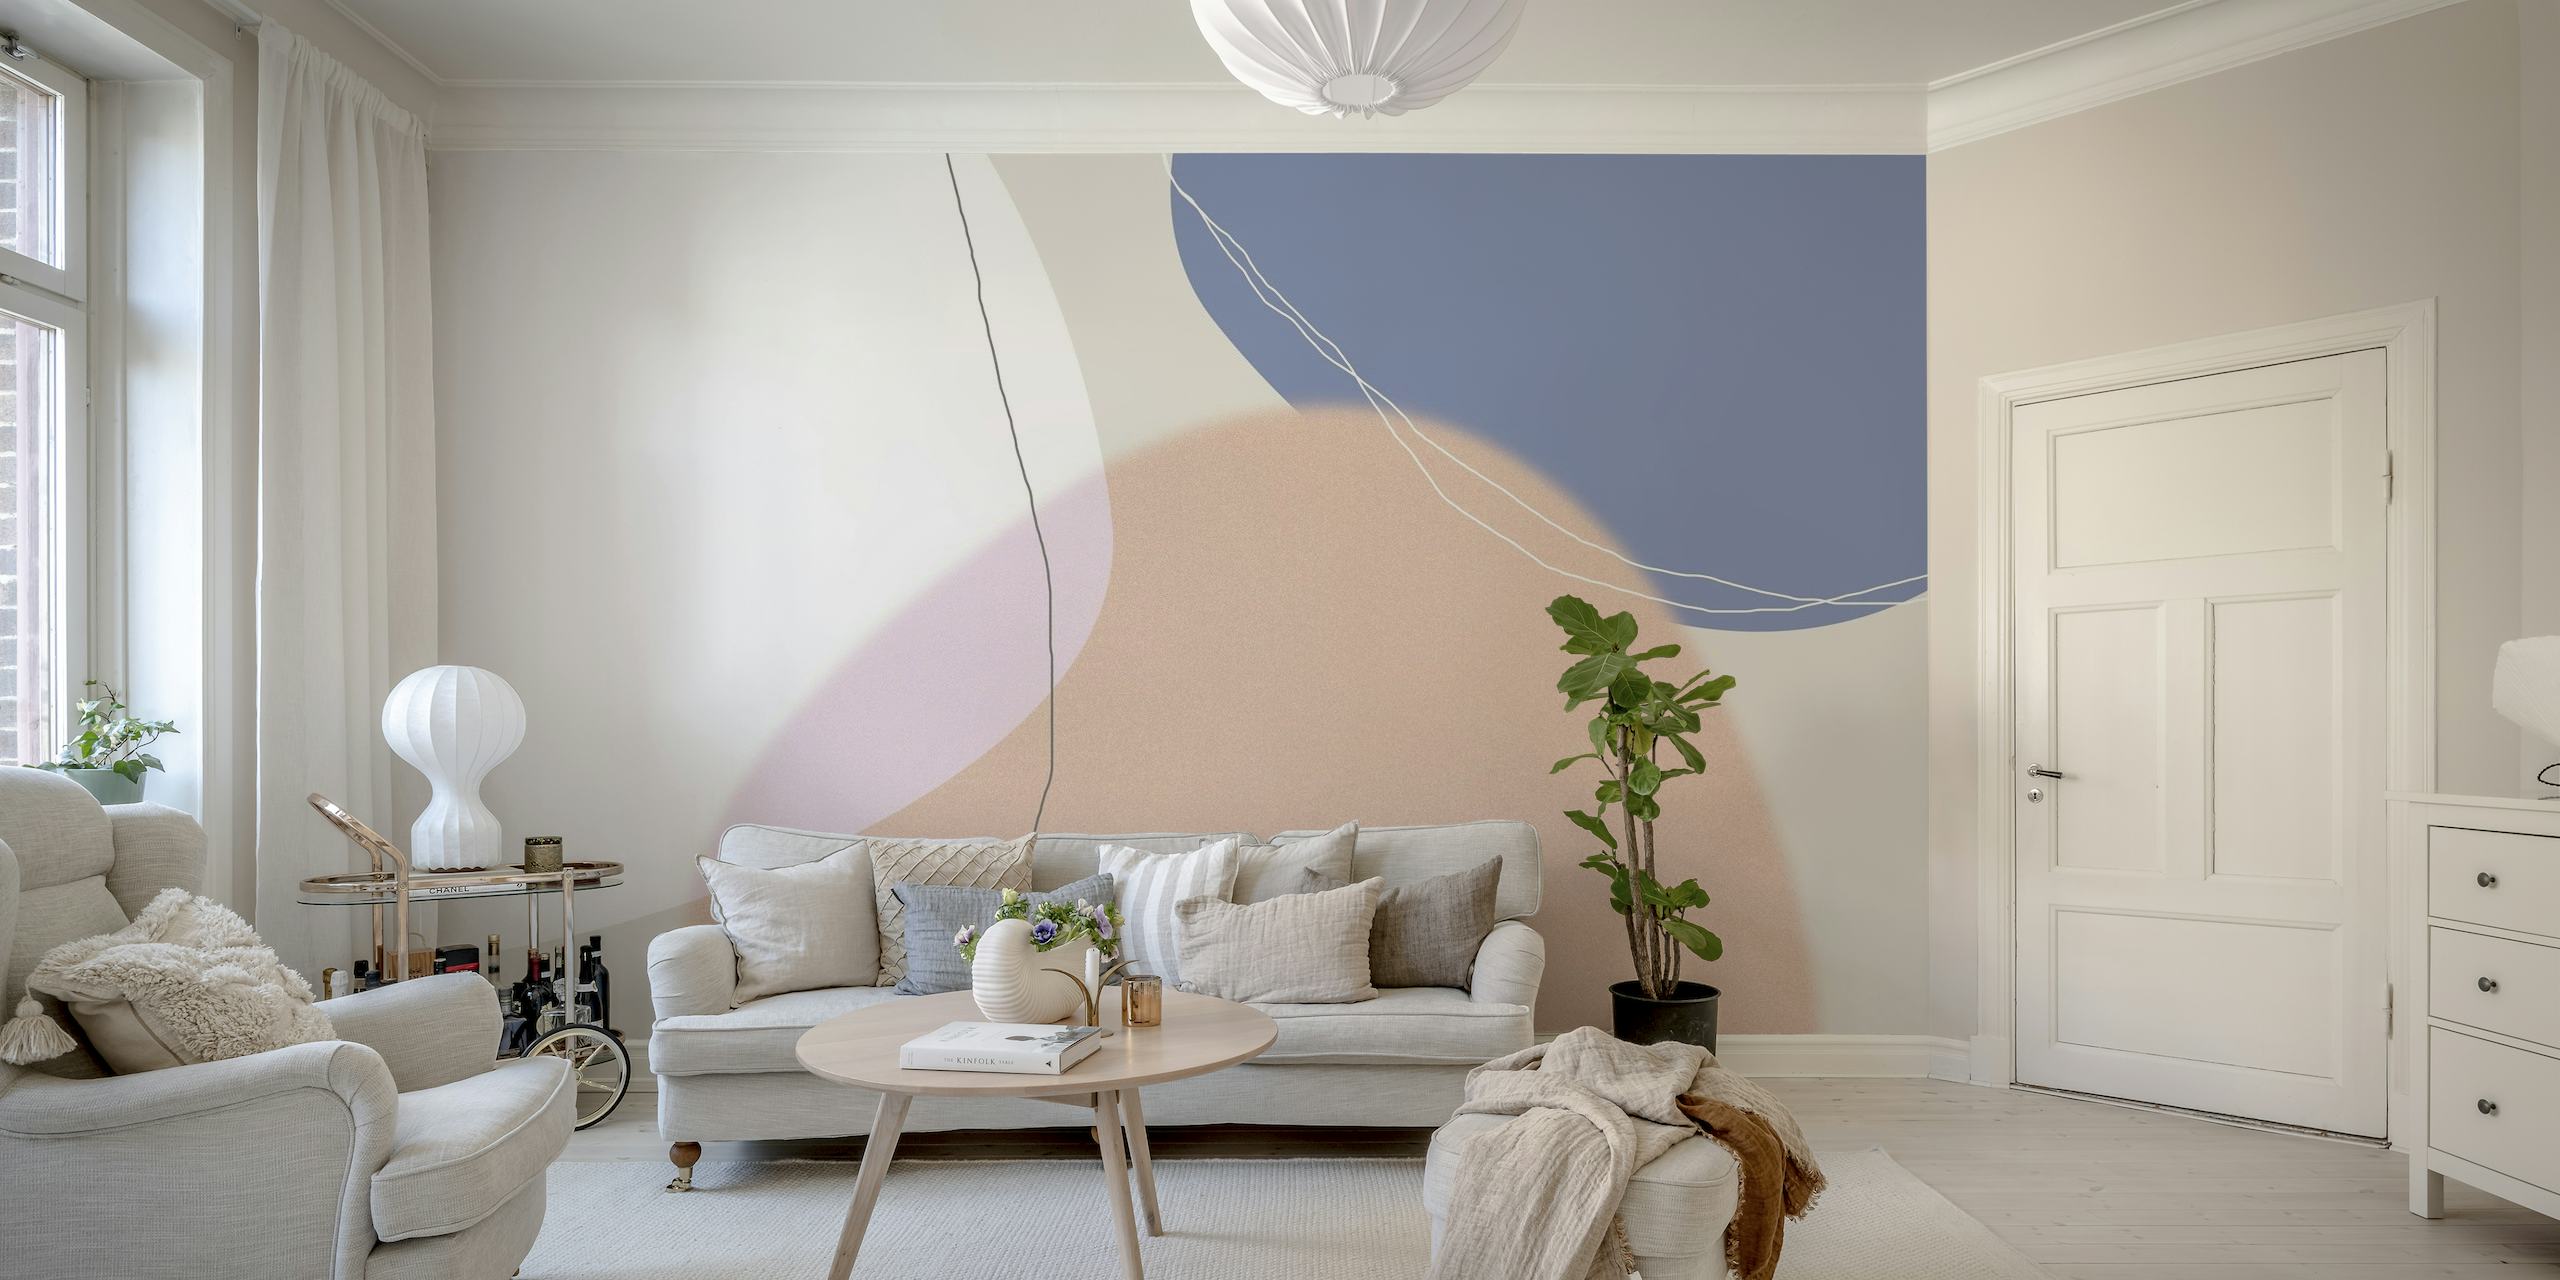 Abstract Graphic 292 wall mural with blush, cream, and deep blue shapes